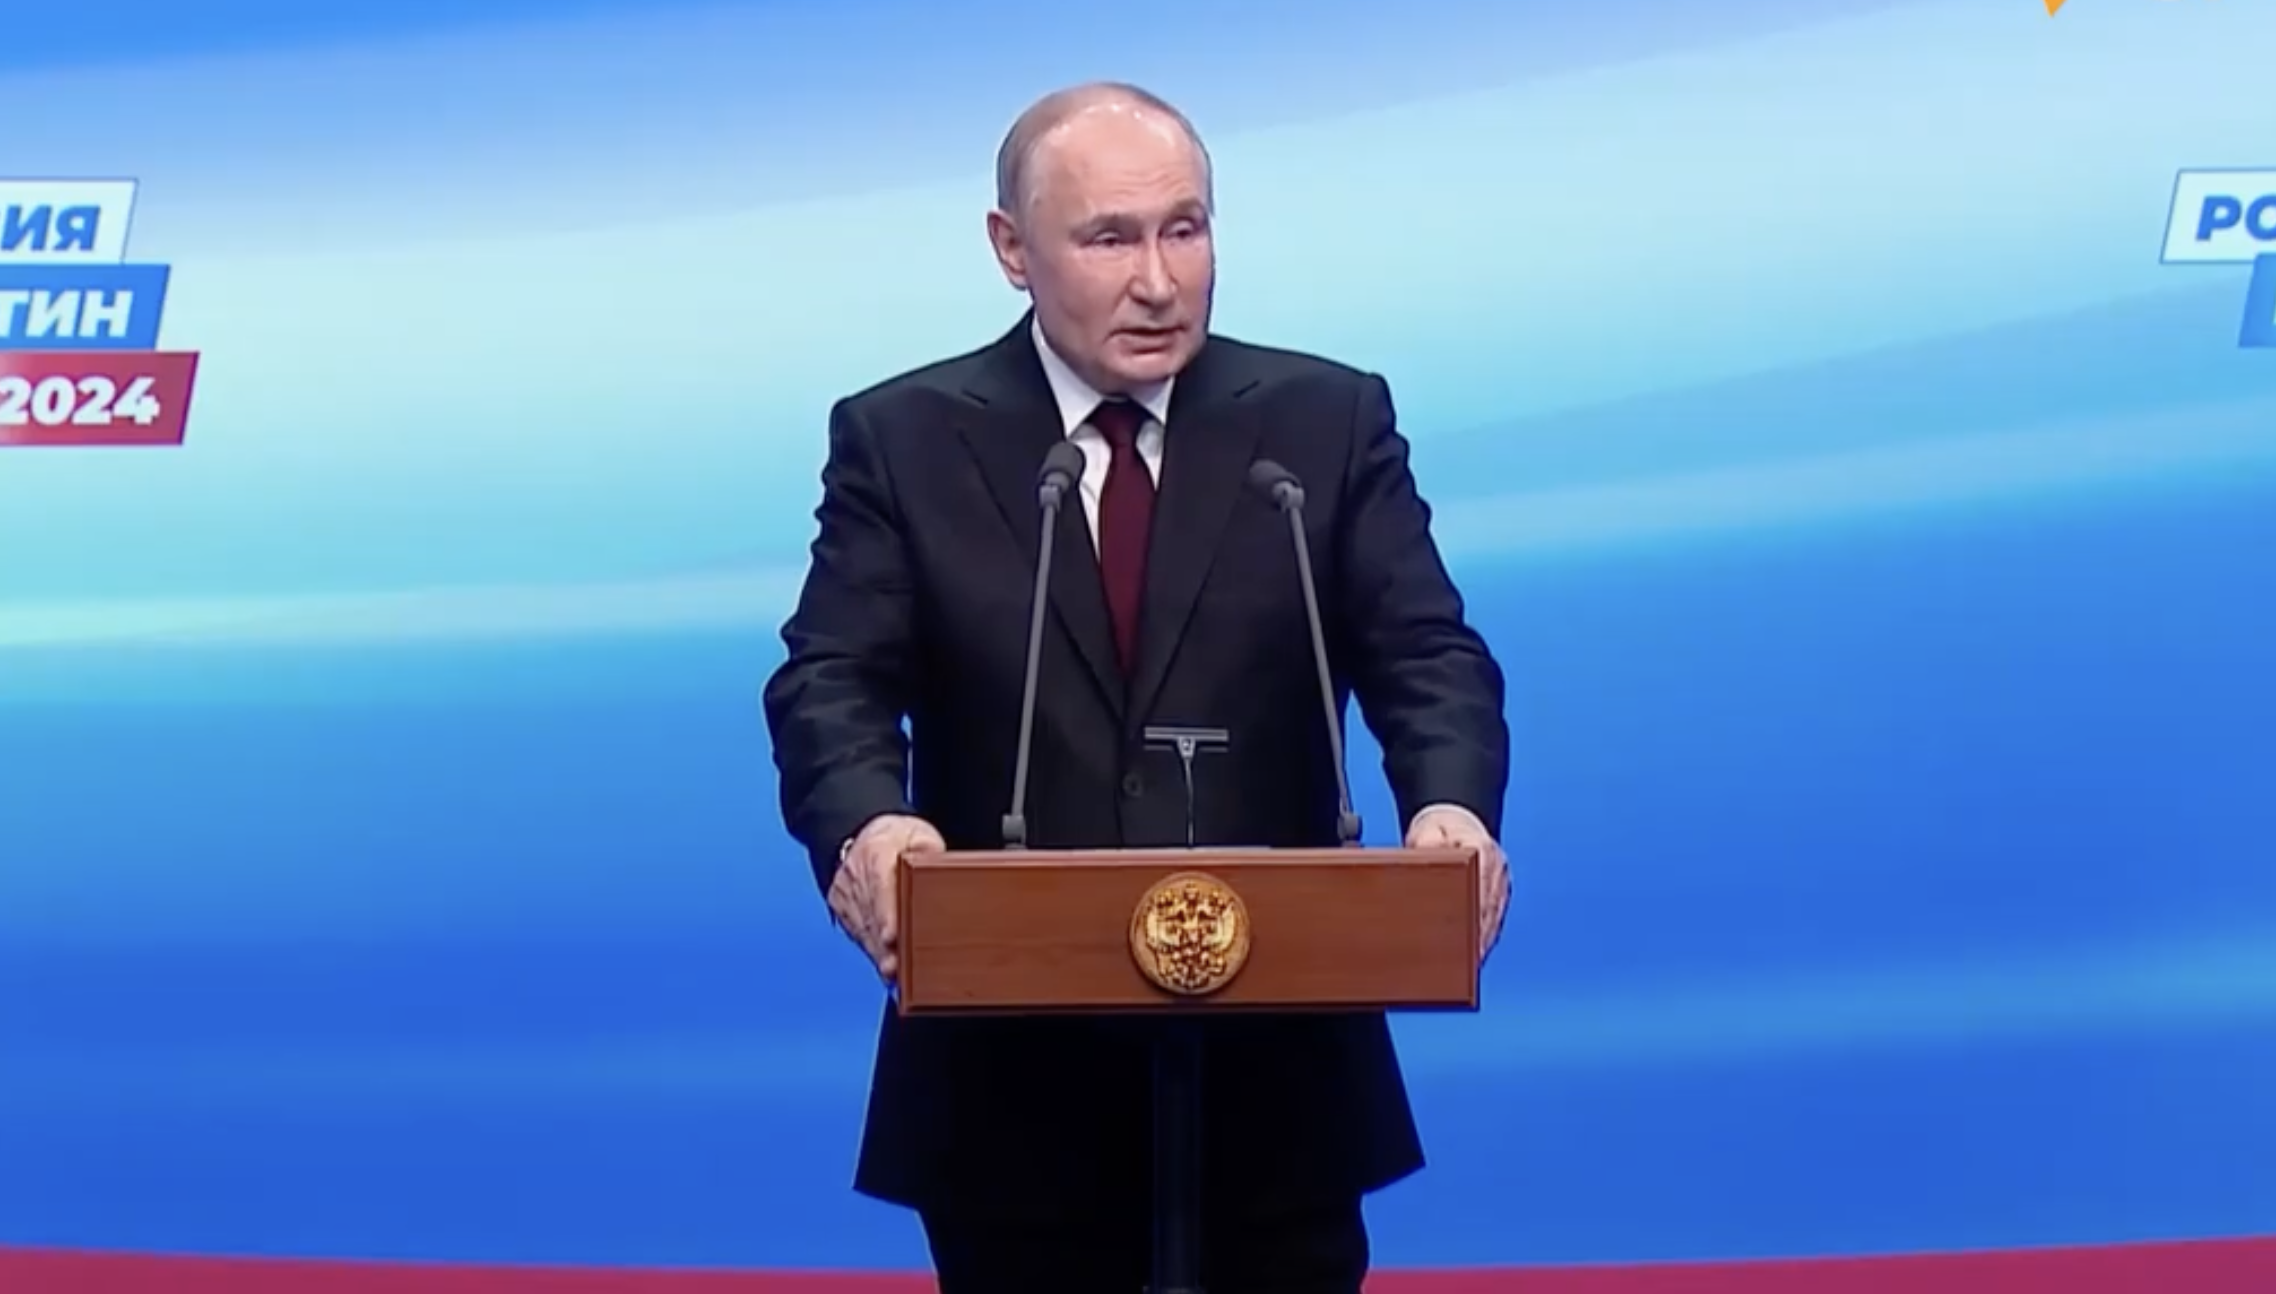 Vladimir Putin easily maintains hold on Russian presidency with 87.2% of the vote